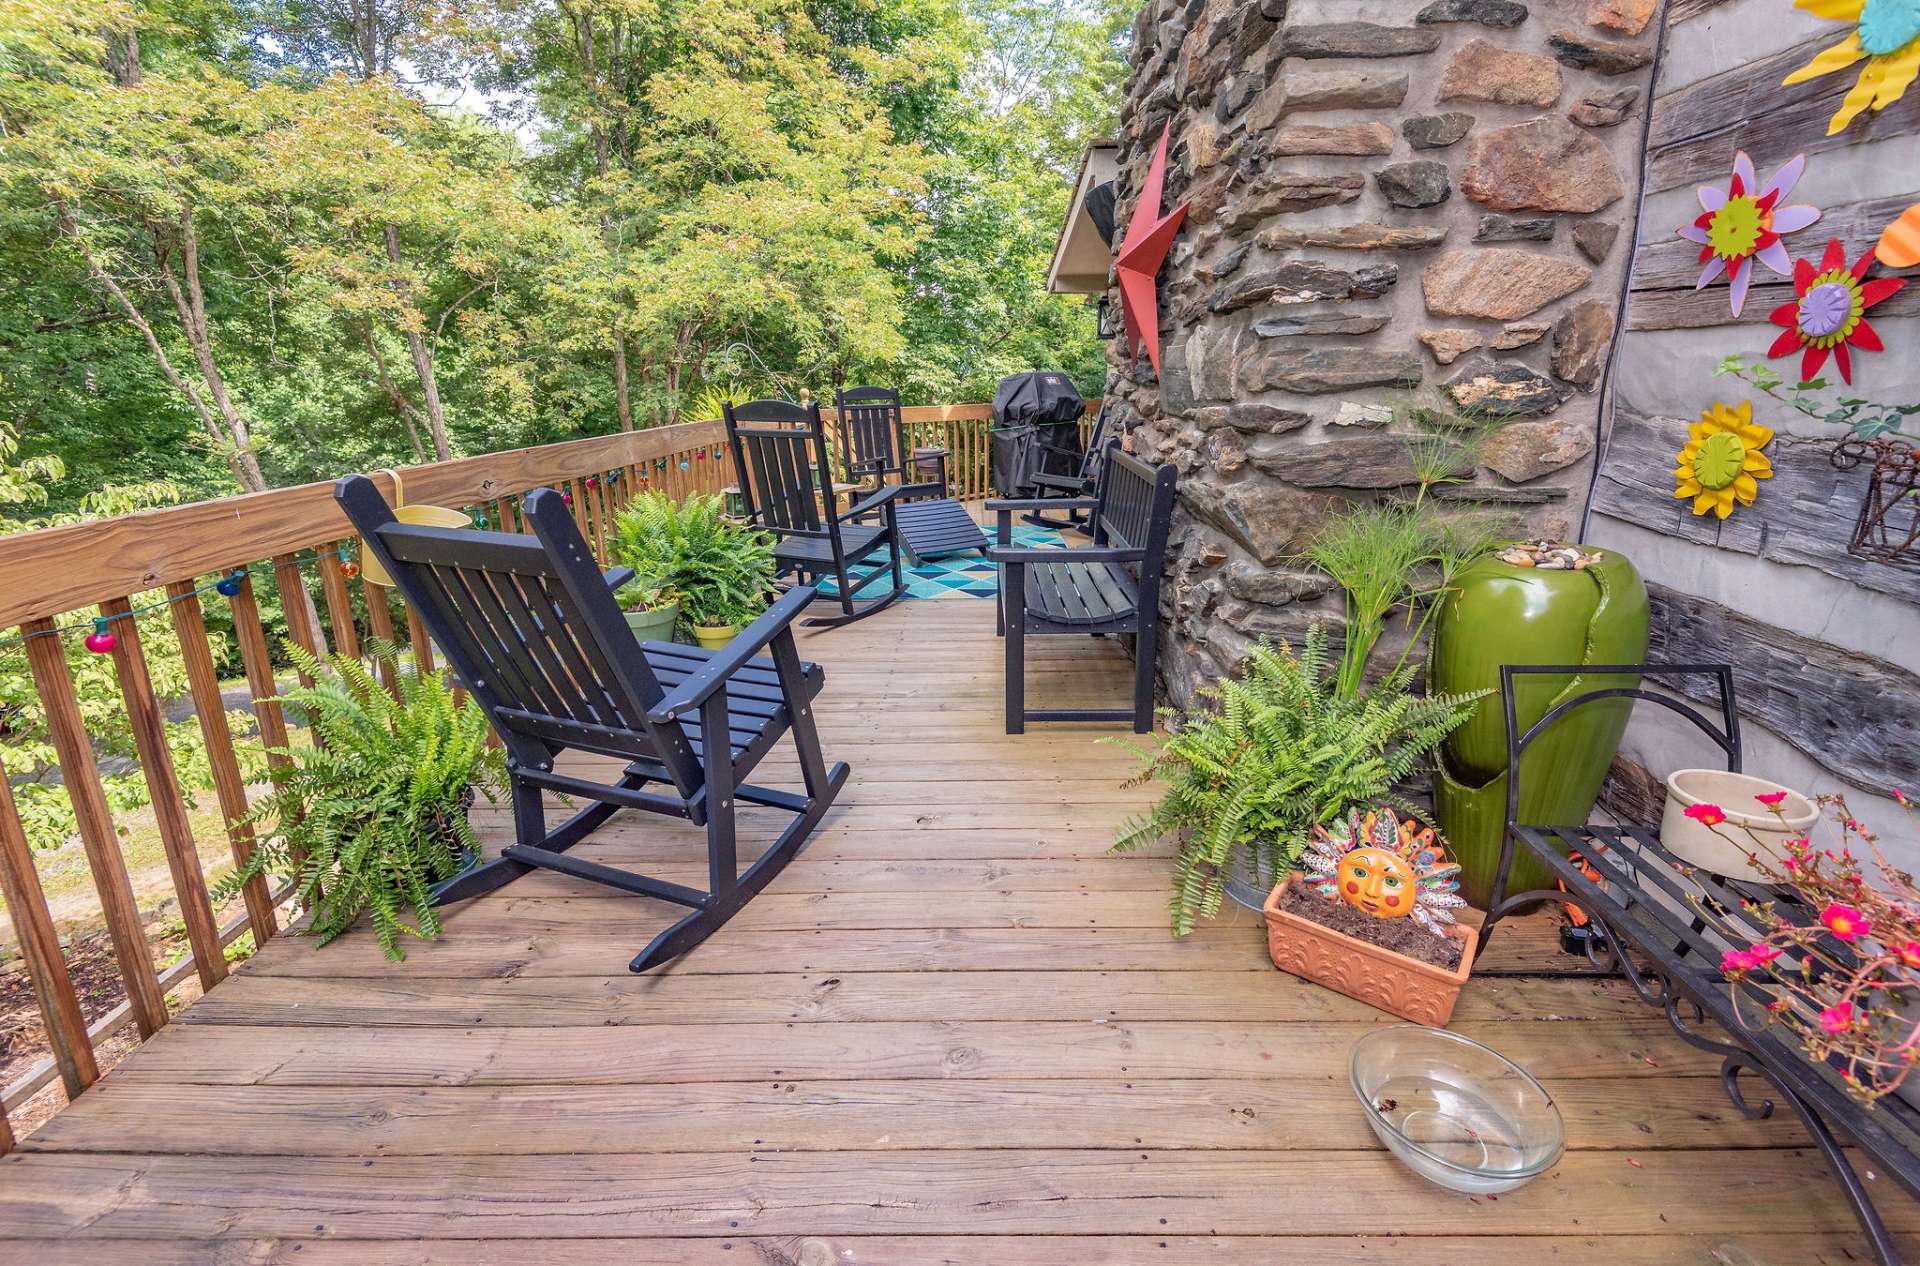 Side deck is a perfect place to set up a barbecue grill and enjoy a favorite beverage with friends.